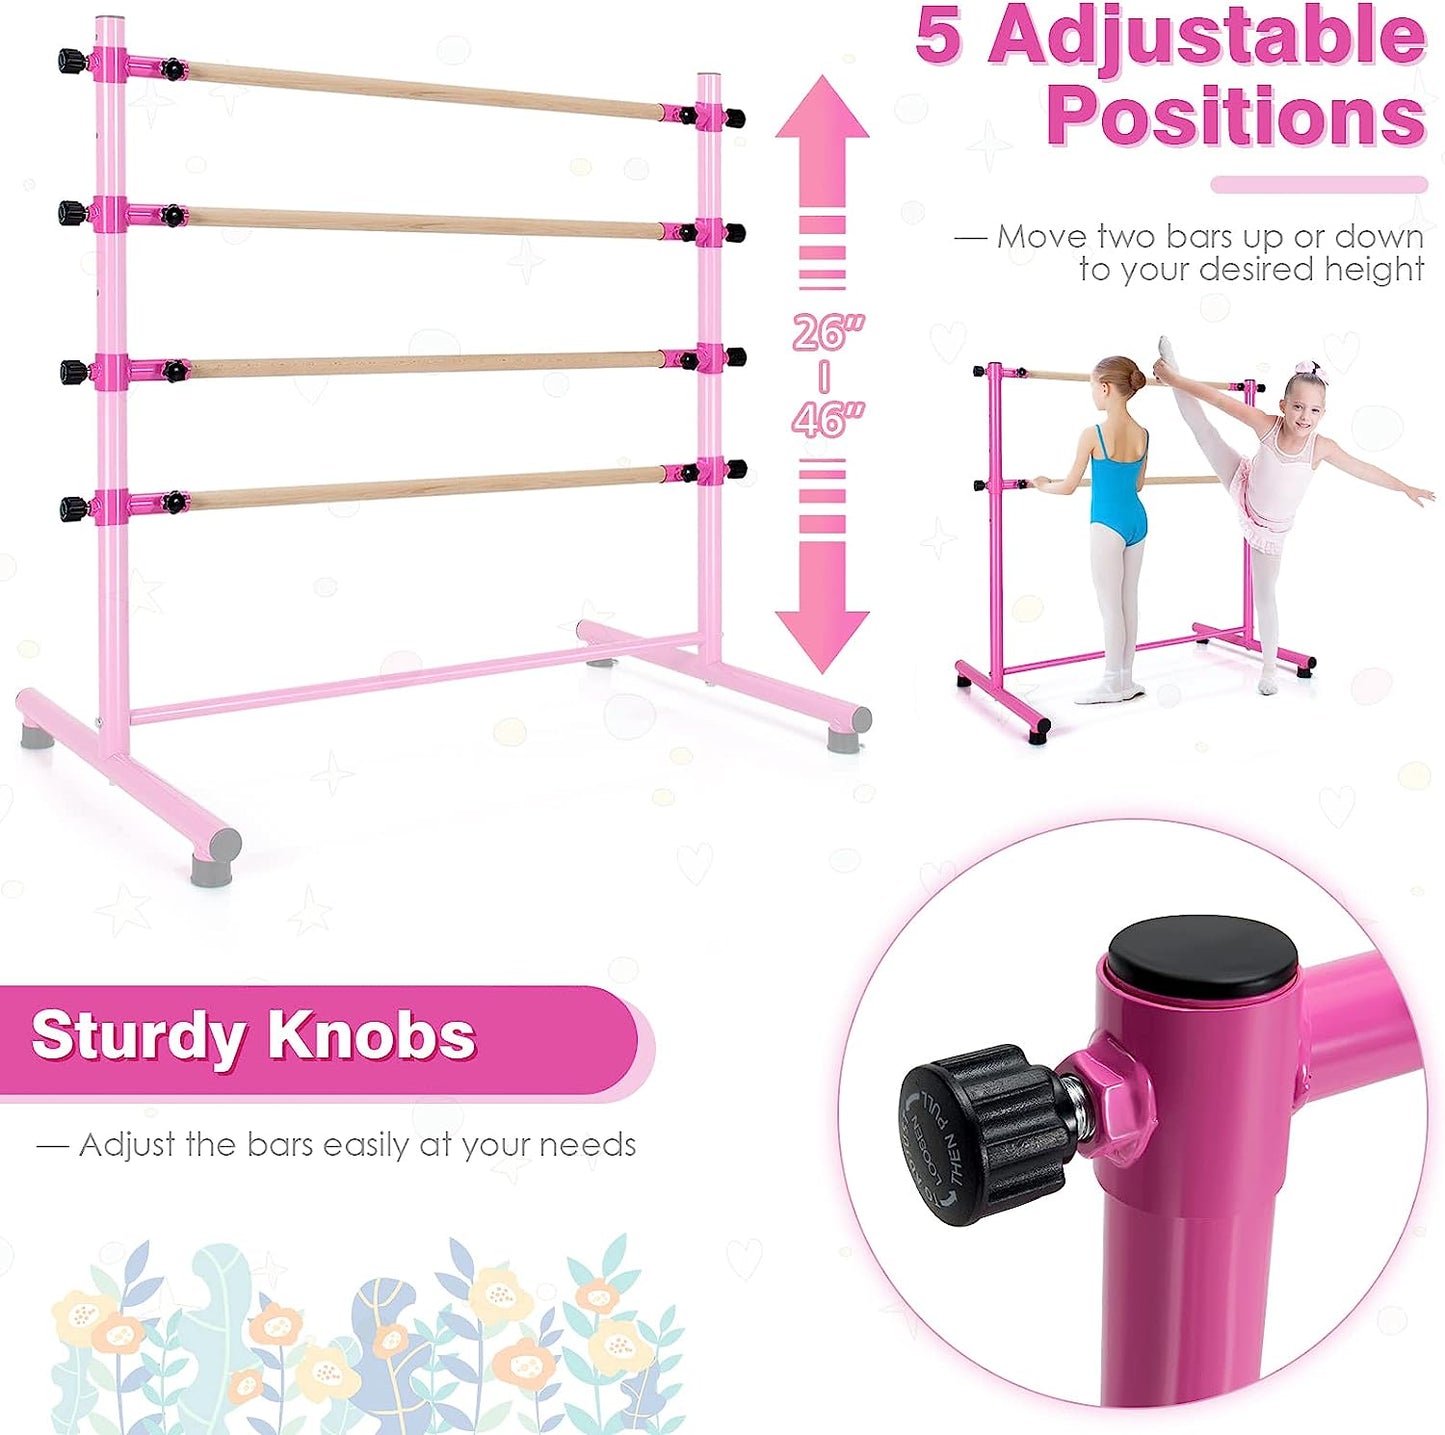 Portable Ballet Barre, 4FT Height Adjustable Double Wood Bar, Freestanding Fitness Dance Bar for Home Studio School, Lightweight Gym Barre Exercise Equipment for Kids & Adults